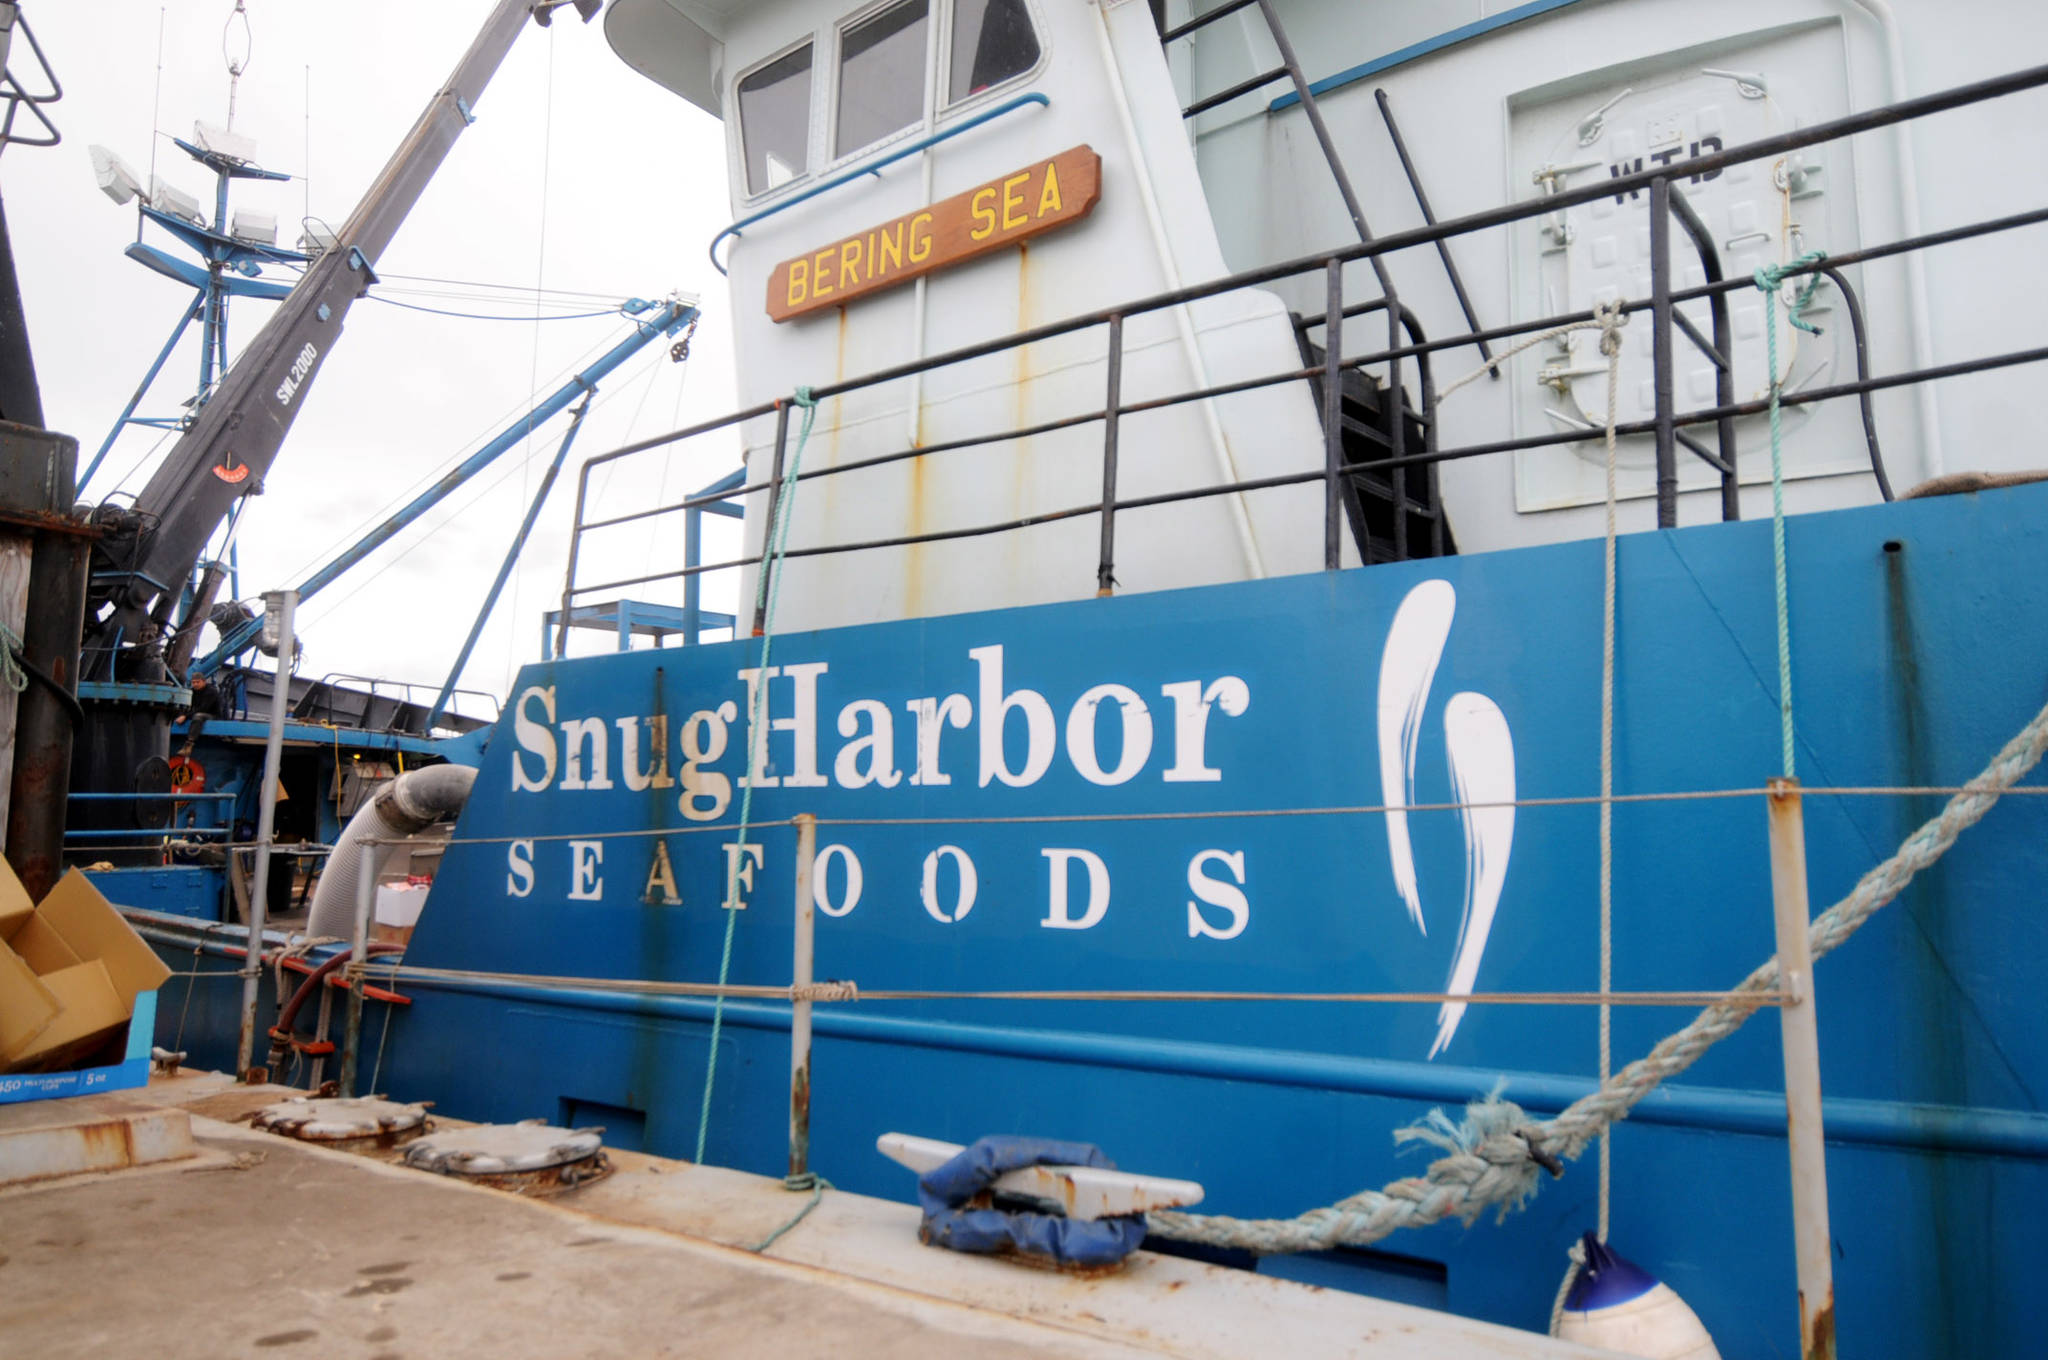 This Friday, May 25, 2018 photo shows the F/V Bering Sea docked at Snug Harbor Seafoods in Kenai, Alaska. A former crab fishing vessel, the Bering Sea now serves as a tender for the processing company. (Photo by Elizabeth Earl/Peninsula Clarion)